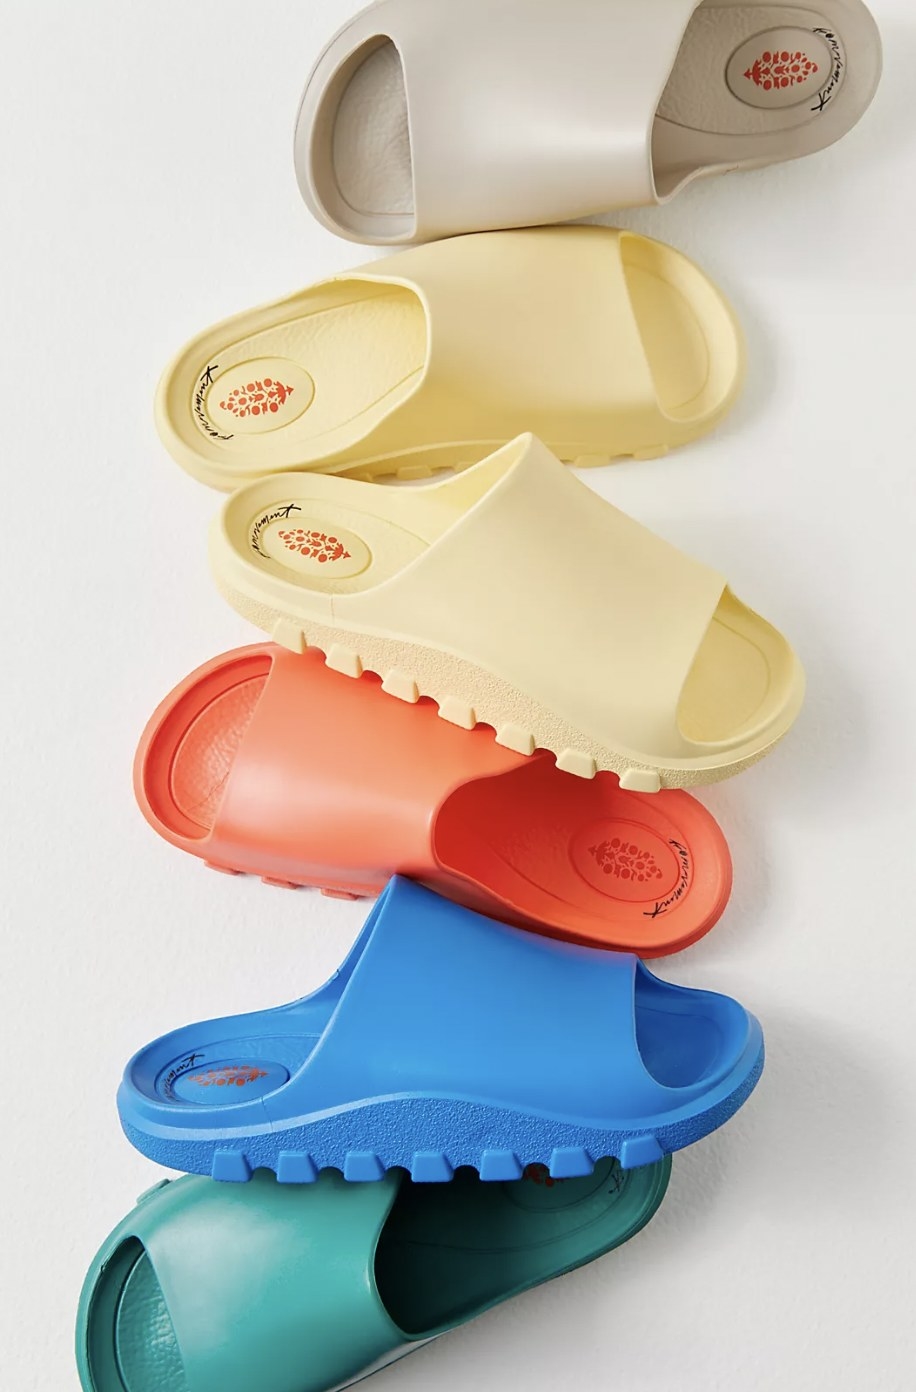 the slippers in green, blue, red, yellow, and beige